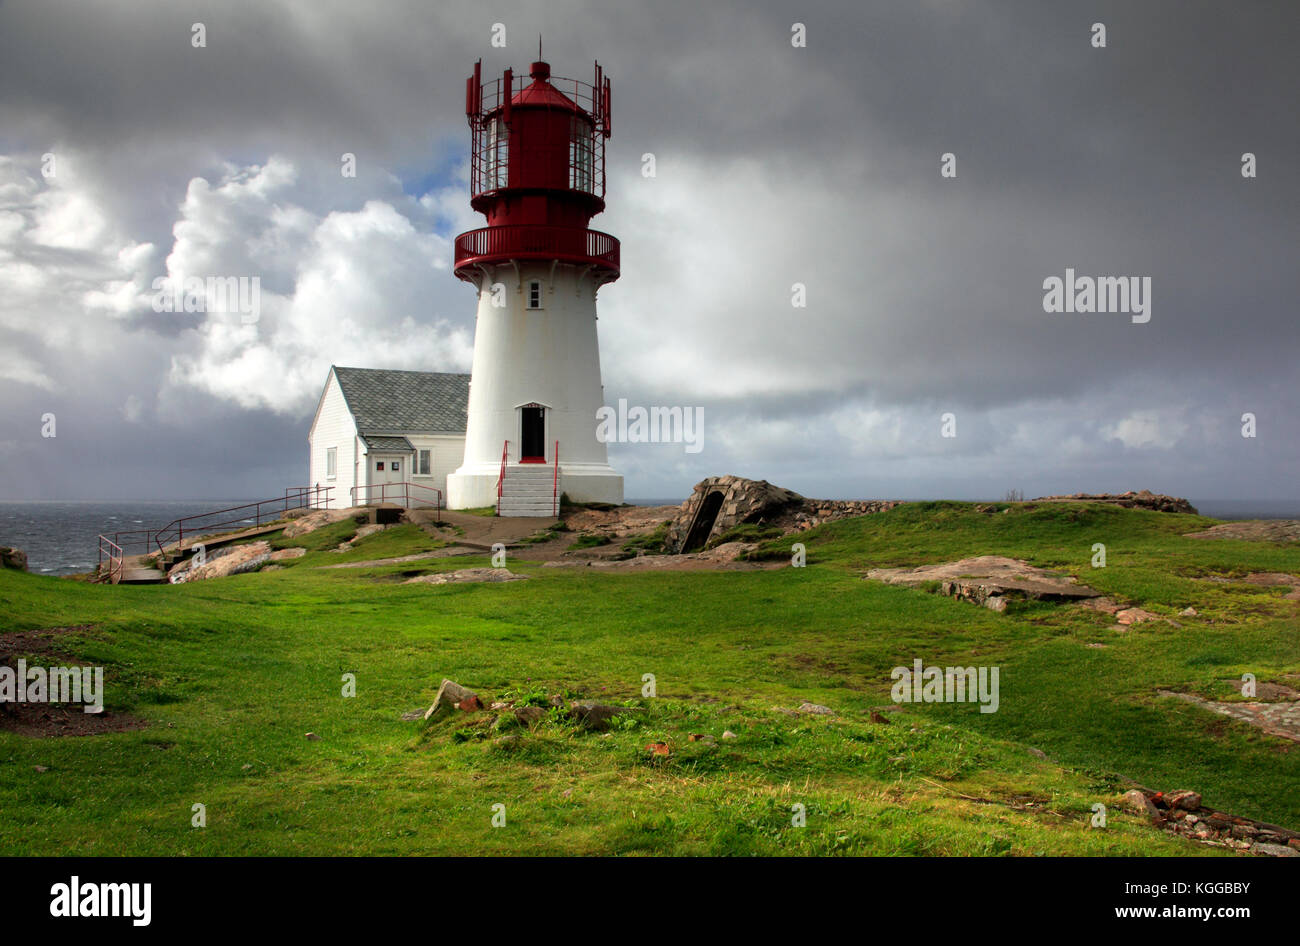 Photo of the Lindesnes Lighthouse, Neset peninsula, southernmost tip mainland Norway Stock Photo